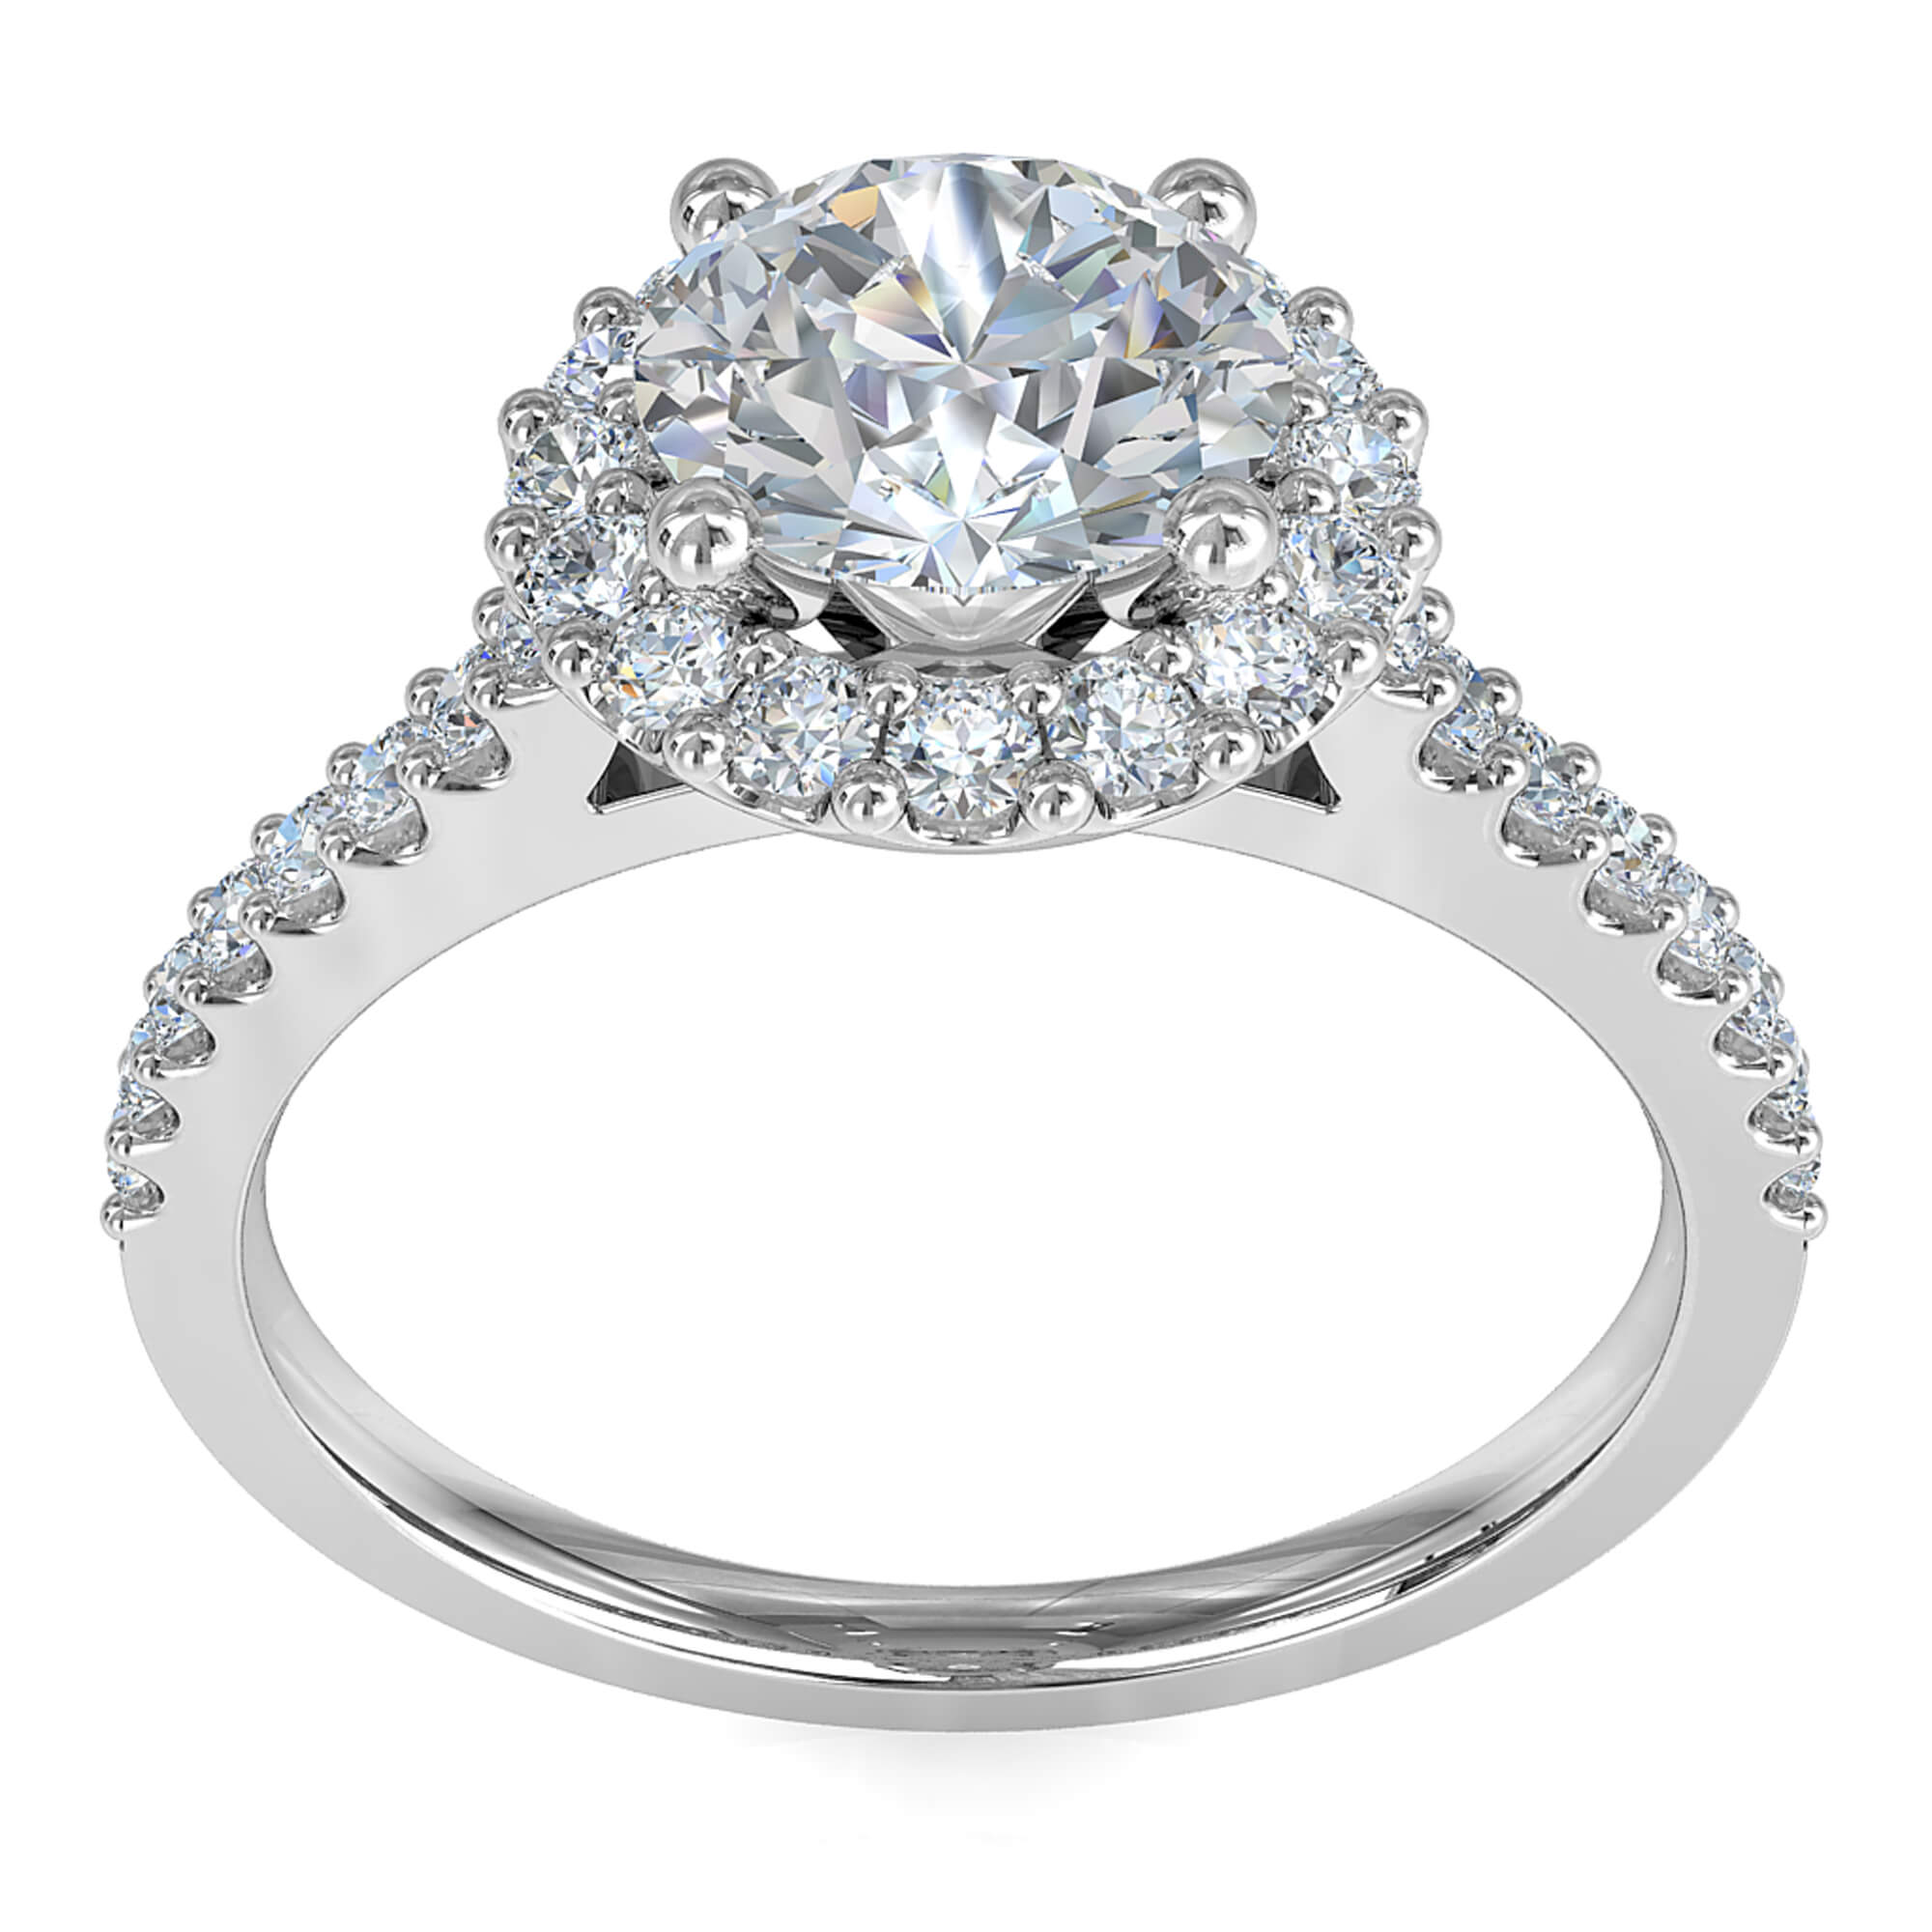 Round Brilliant Cut Halo Diamond Engagement Ring, 4 Button Claws set in a Square Cut Claw Halo on a Thin Cut Claw Band with Support Bar Undersetting.